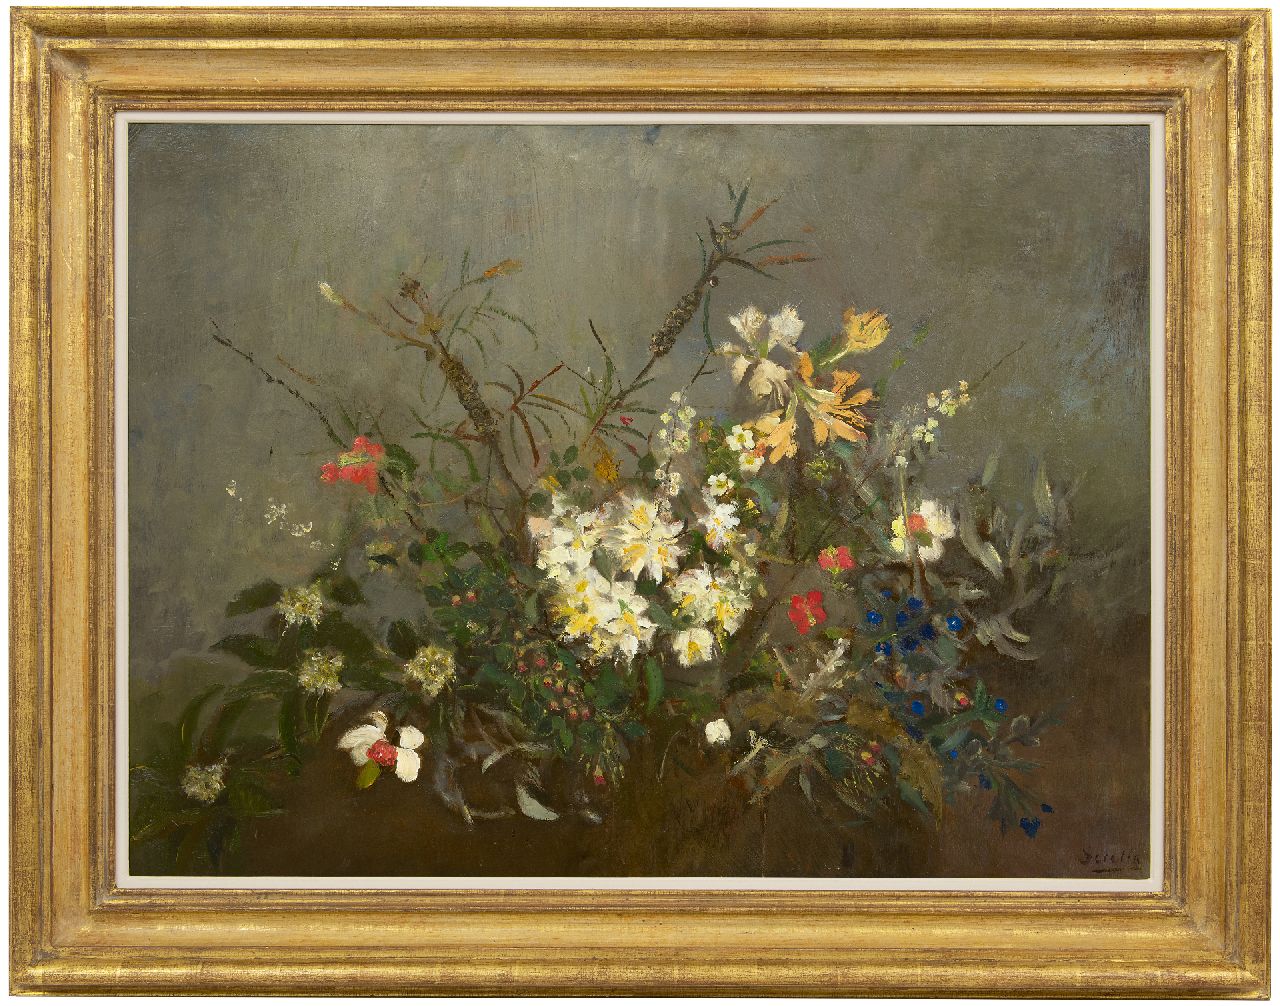 Sorella (Theresia Ansingh)   | Sorella (Theresia Ansingh) | Paintings offered for sale | Spring flowers, oil on board 75.2 x 99.8 cm, signed l.r.